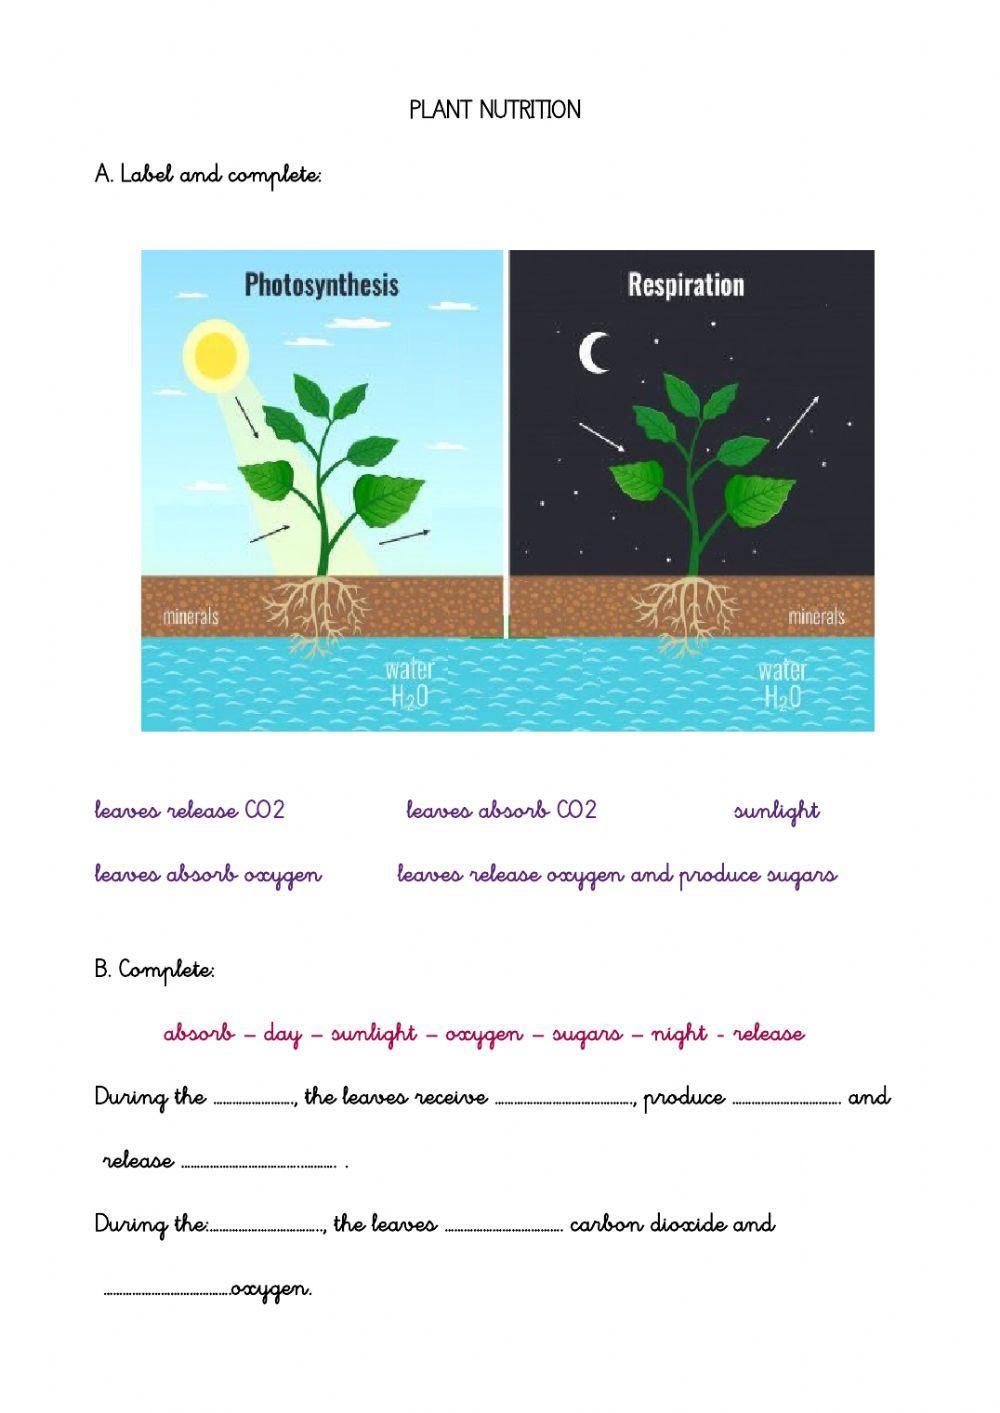 Plant nutrition and respiration adapted